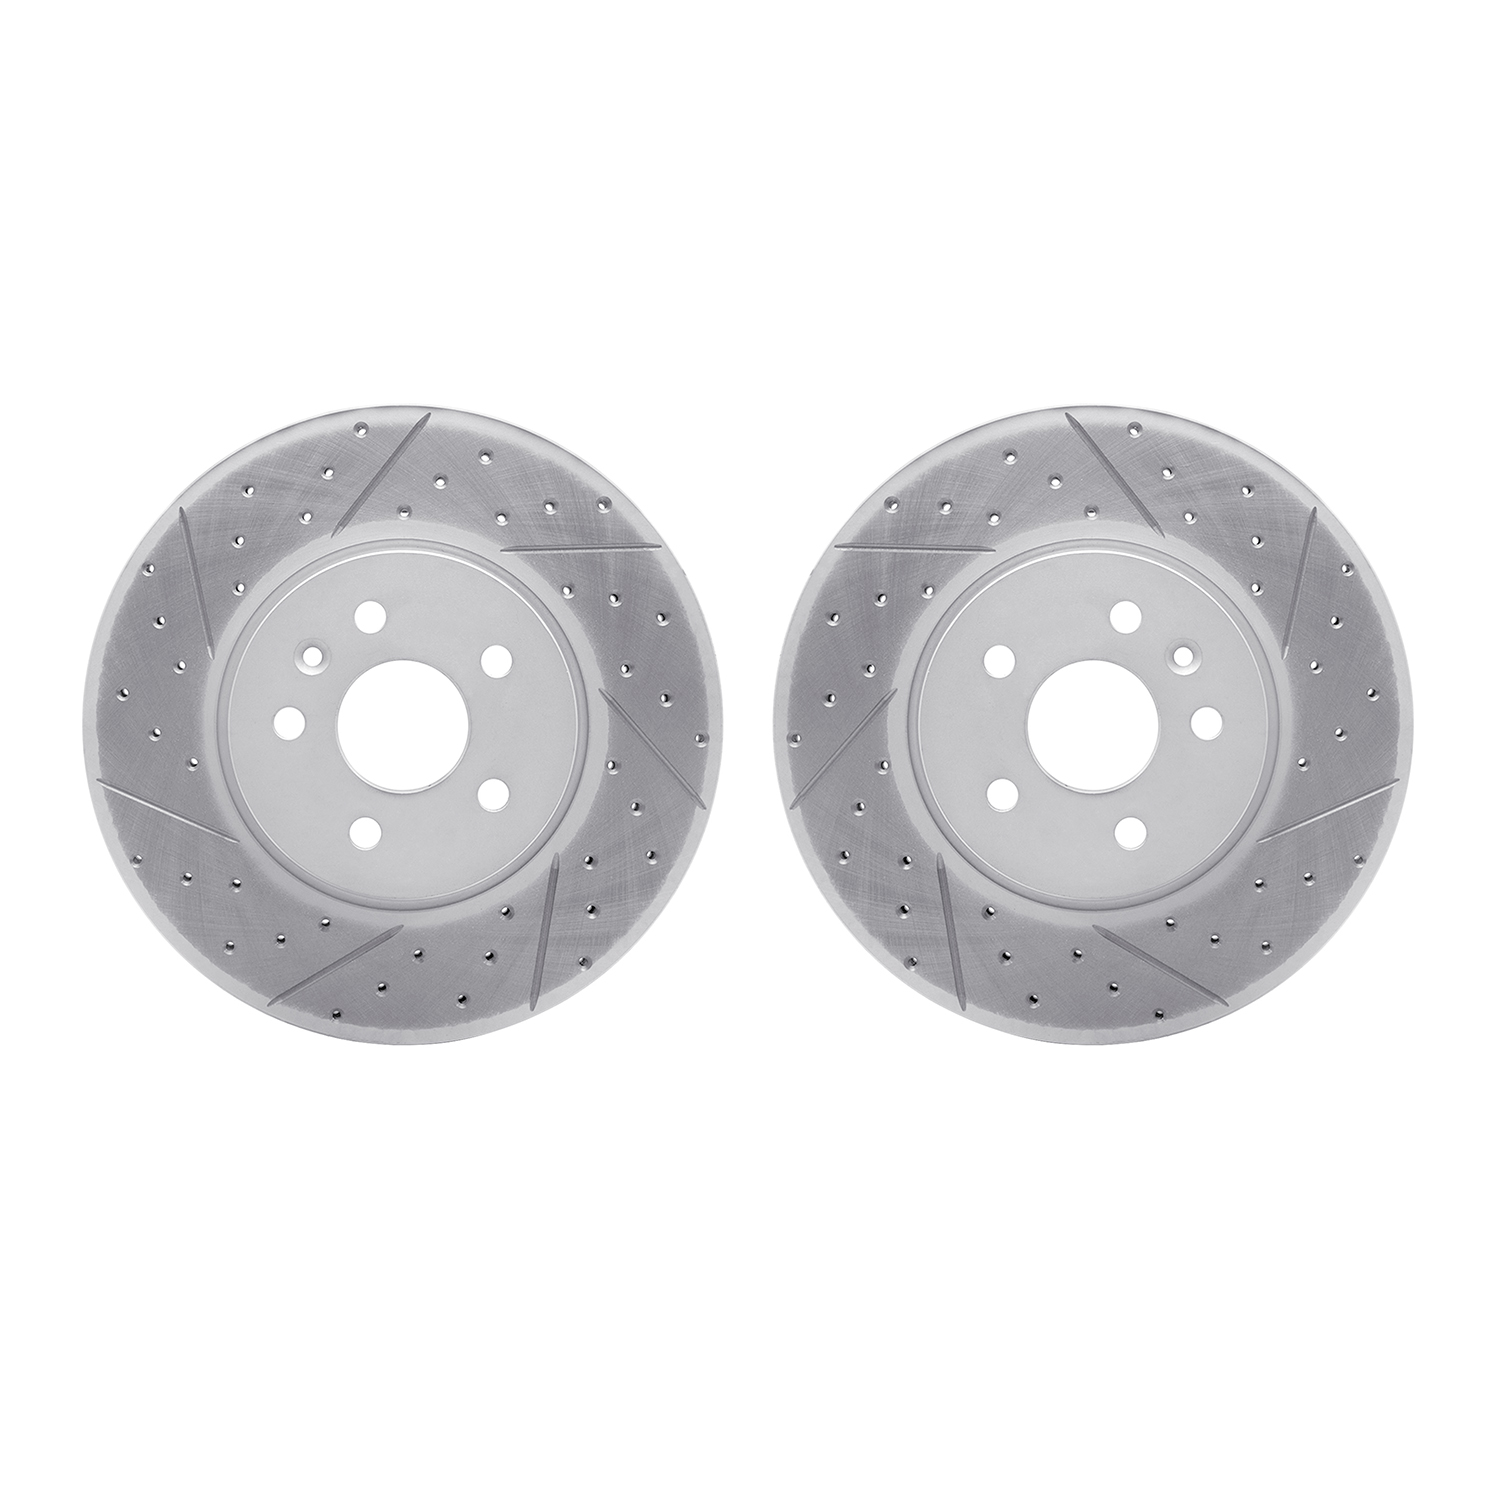 2002-45002 Geoperformance Drilled/Slotted Brake Rotors, Fits Select GM, Position: Front